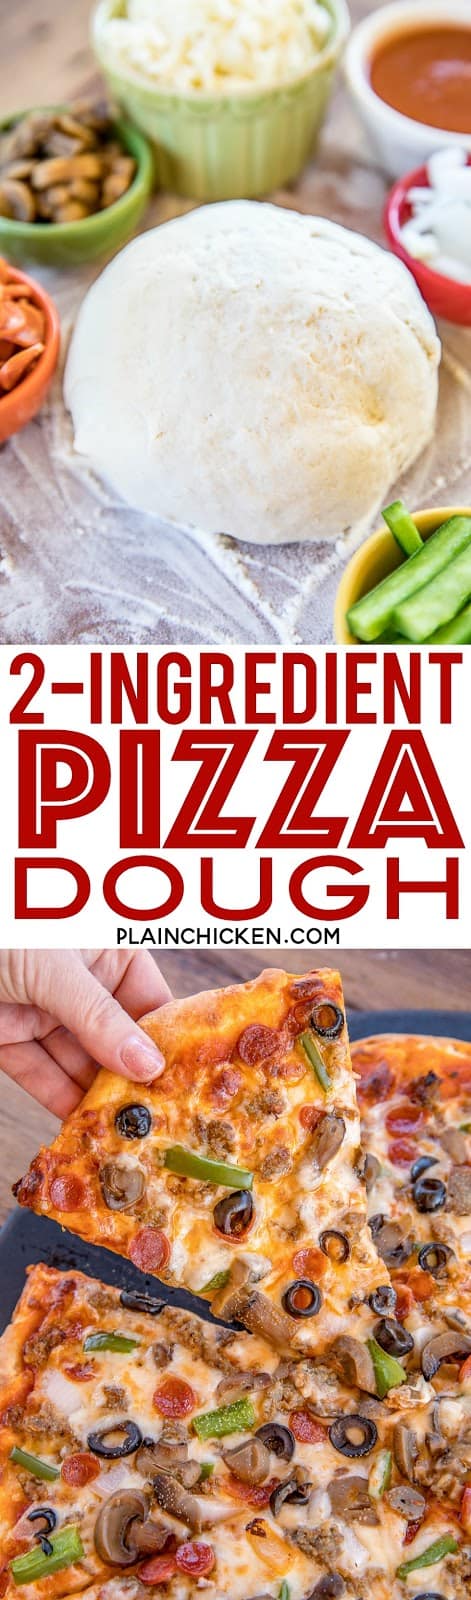 2-Ingredient Pizza Dough - ready to bake in 5 minutes!! Self-rising flour and greek yogurt. This is our go-to weeknight pizza dough! #pizza #pizzadough #greekyogurt